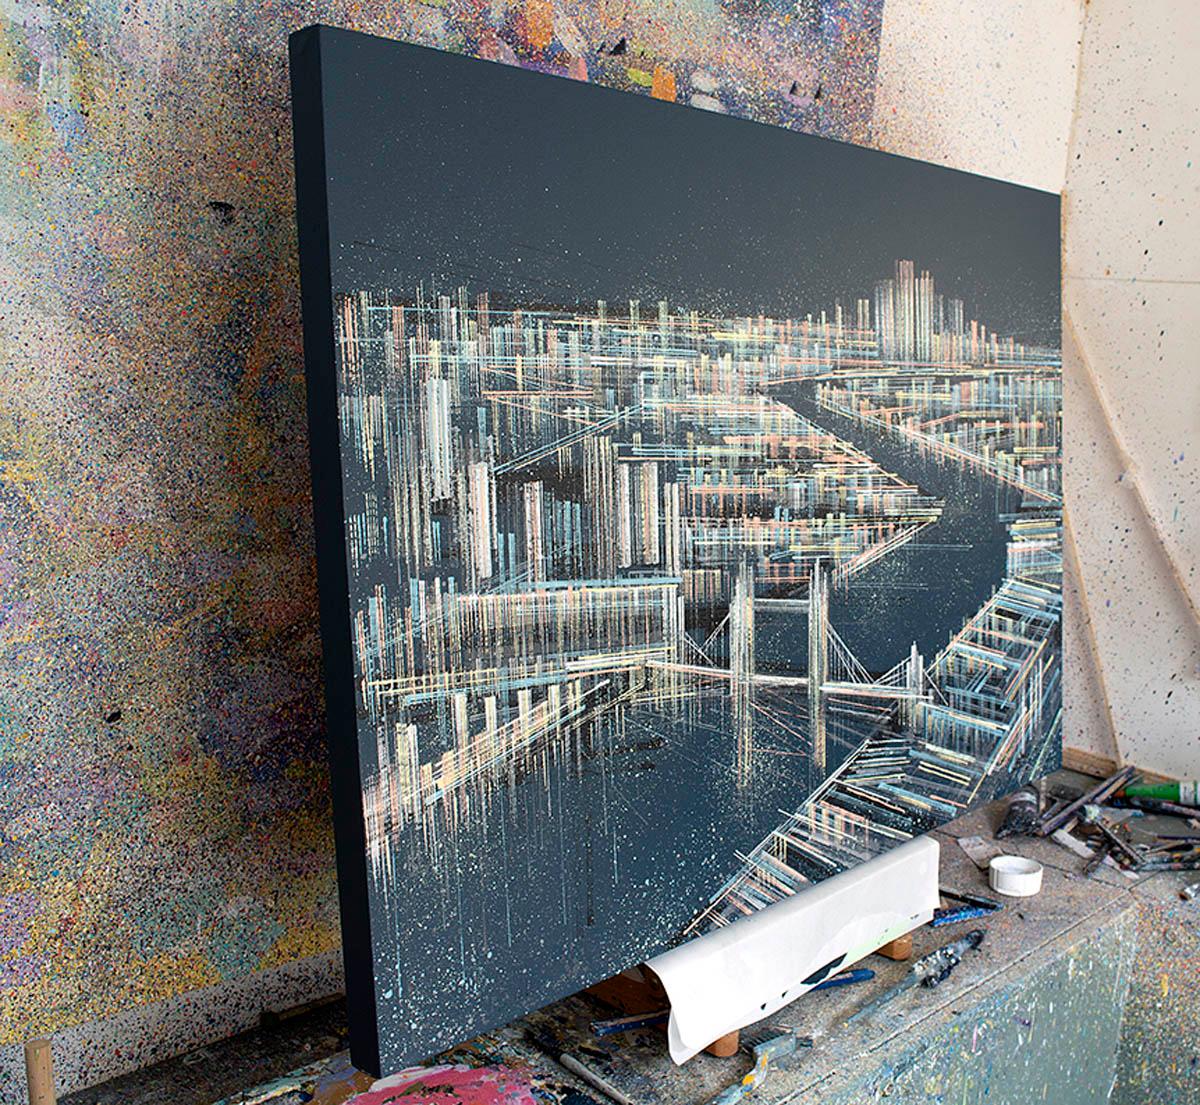 Marc Todd. London Tower Bridge And The City Beyond, Contemporary Cityscape Art 1